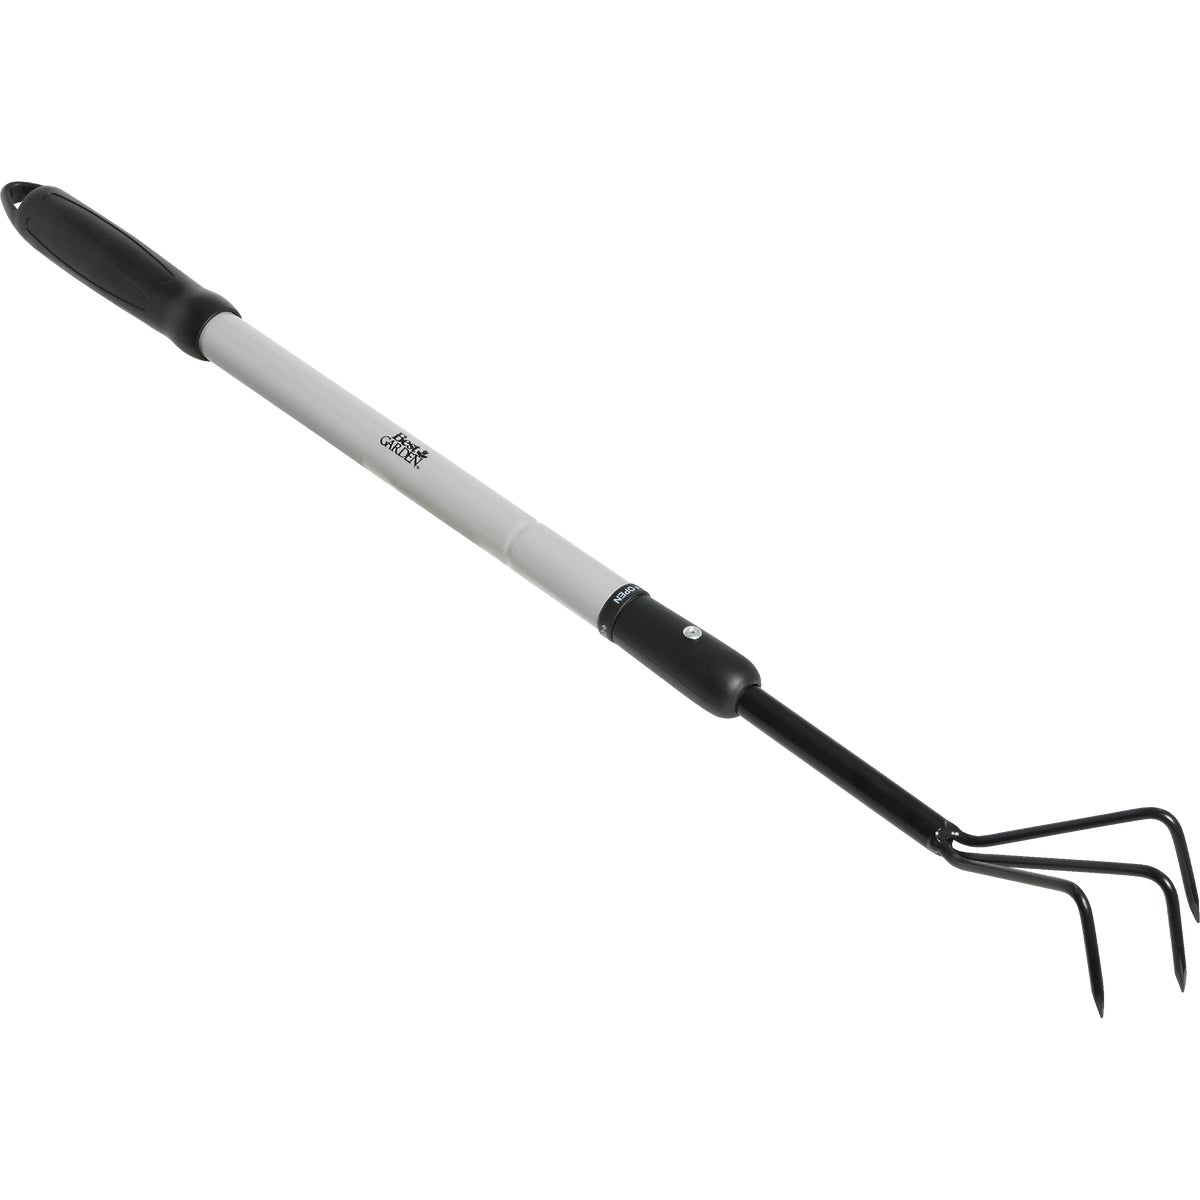 Item 703892, Extendable cultivator has a lightweight steel handle that extends from 18" 